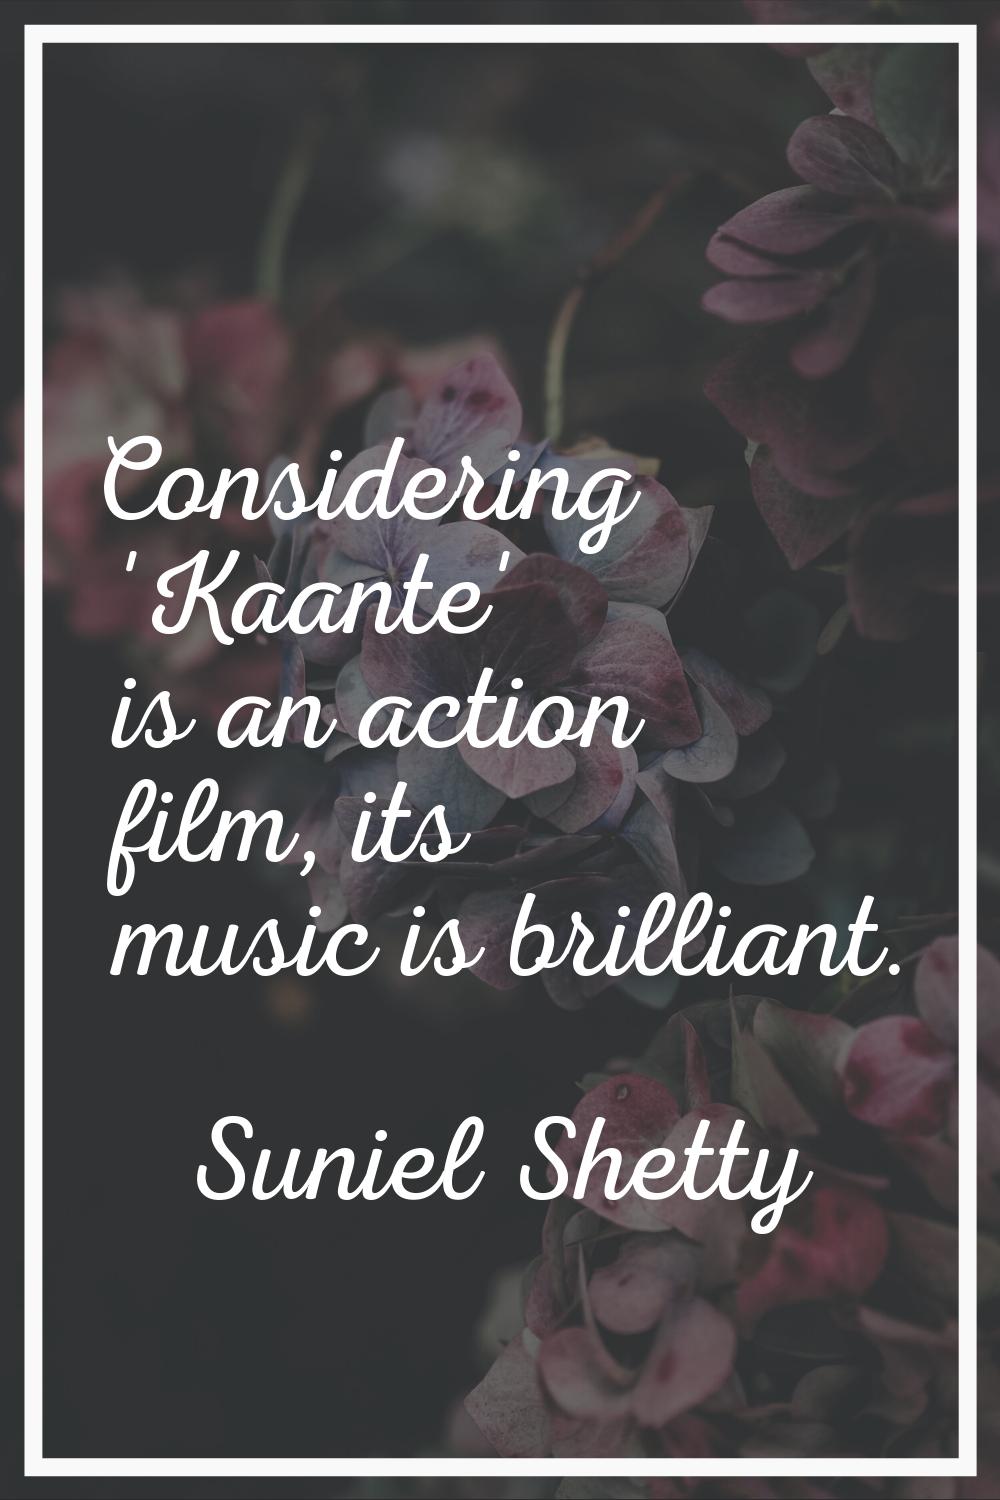 Considering 'Kaante' is an action film, its music is brilliant.